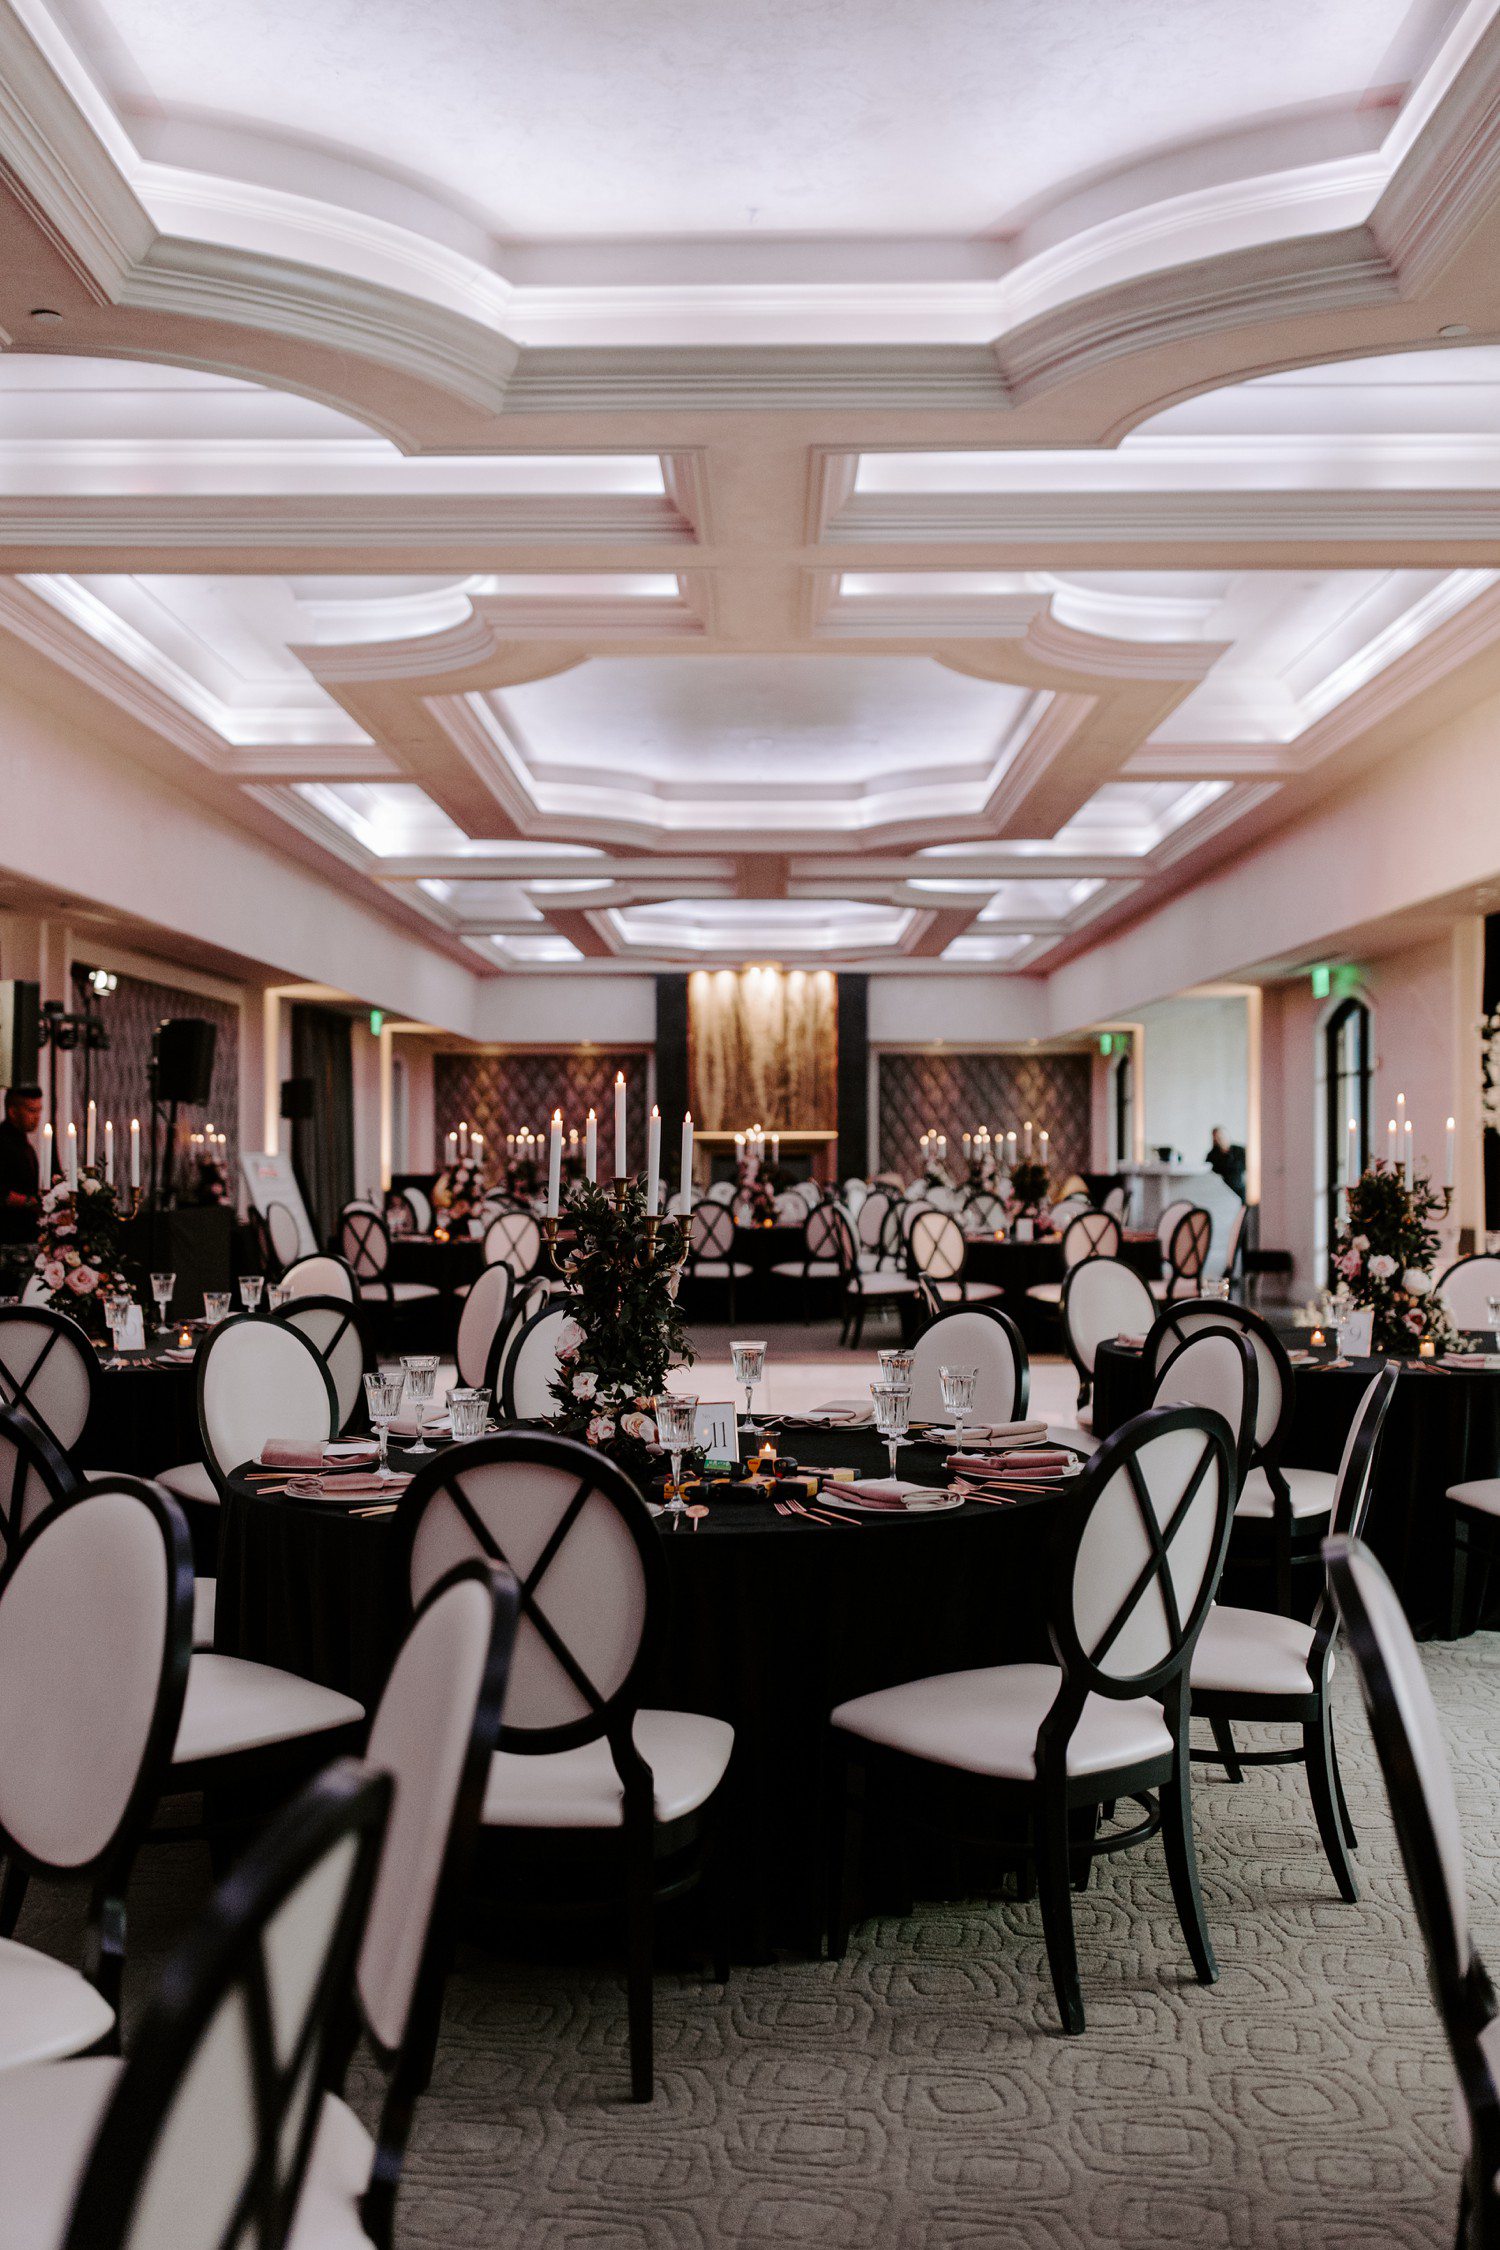 Decorated wedding reception at The Stirling Club in Las Vegas.